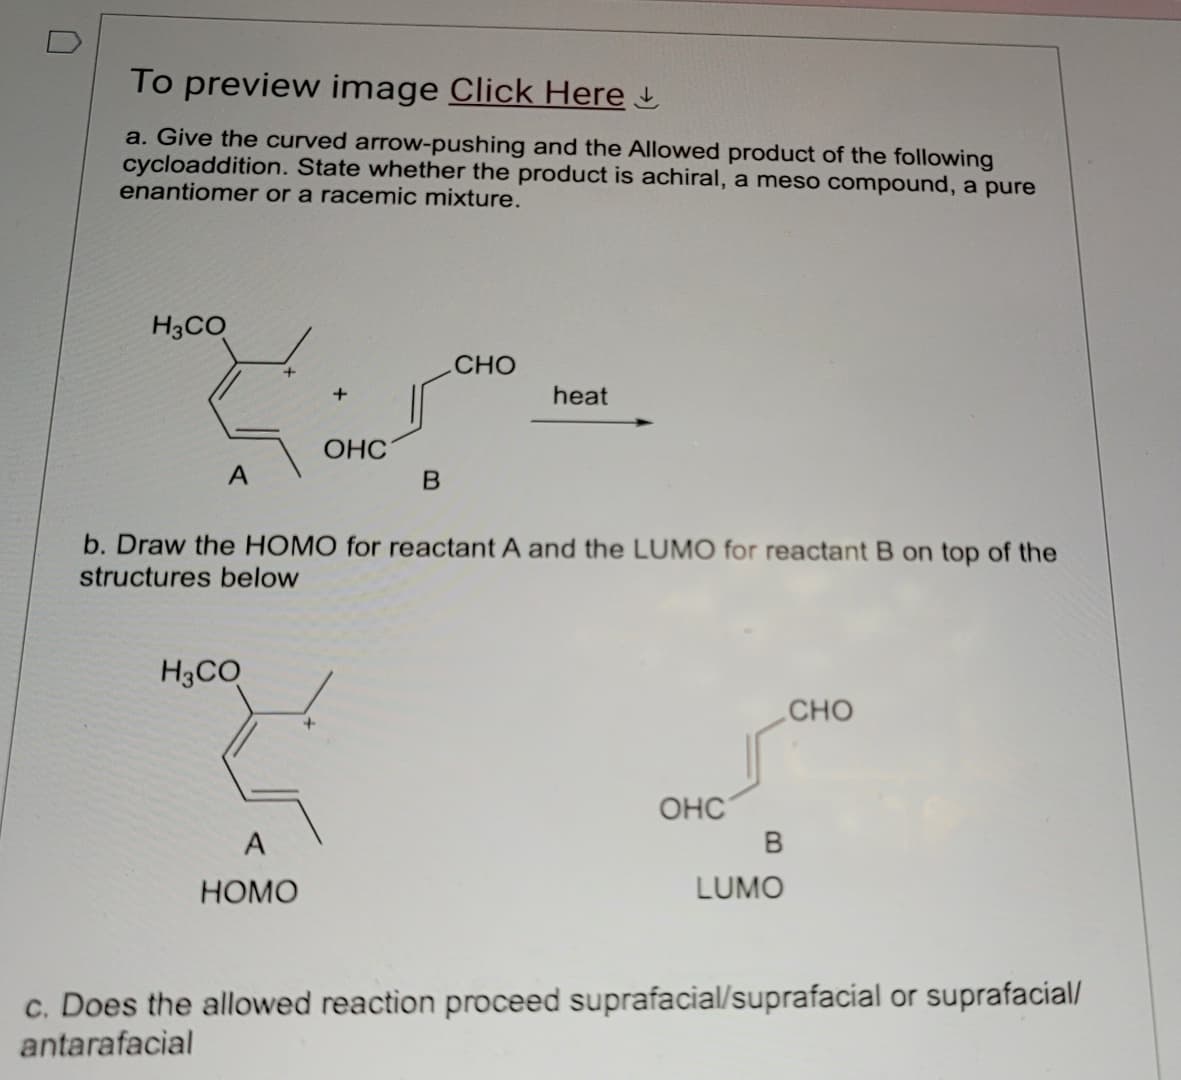 To preview image Click Here
a. Give the curved arrow-pushing and the Allowed product of the following
cycloaddition. State whether the product is achiral, a meso compound, a pure
enantiomer or a racemic mixture.
H3CO
CHO
+
heat
OHC
A
B
b. Draw the HOMO for reactant A and the LUMO for reactant B on top of the
structures below
H3CO
A
HOMO
+
OHC
B
LUMO
CHO
c. Does the allowed reaction proceed suprafacial/suprafacial or suprafacial/
antarafacial